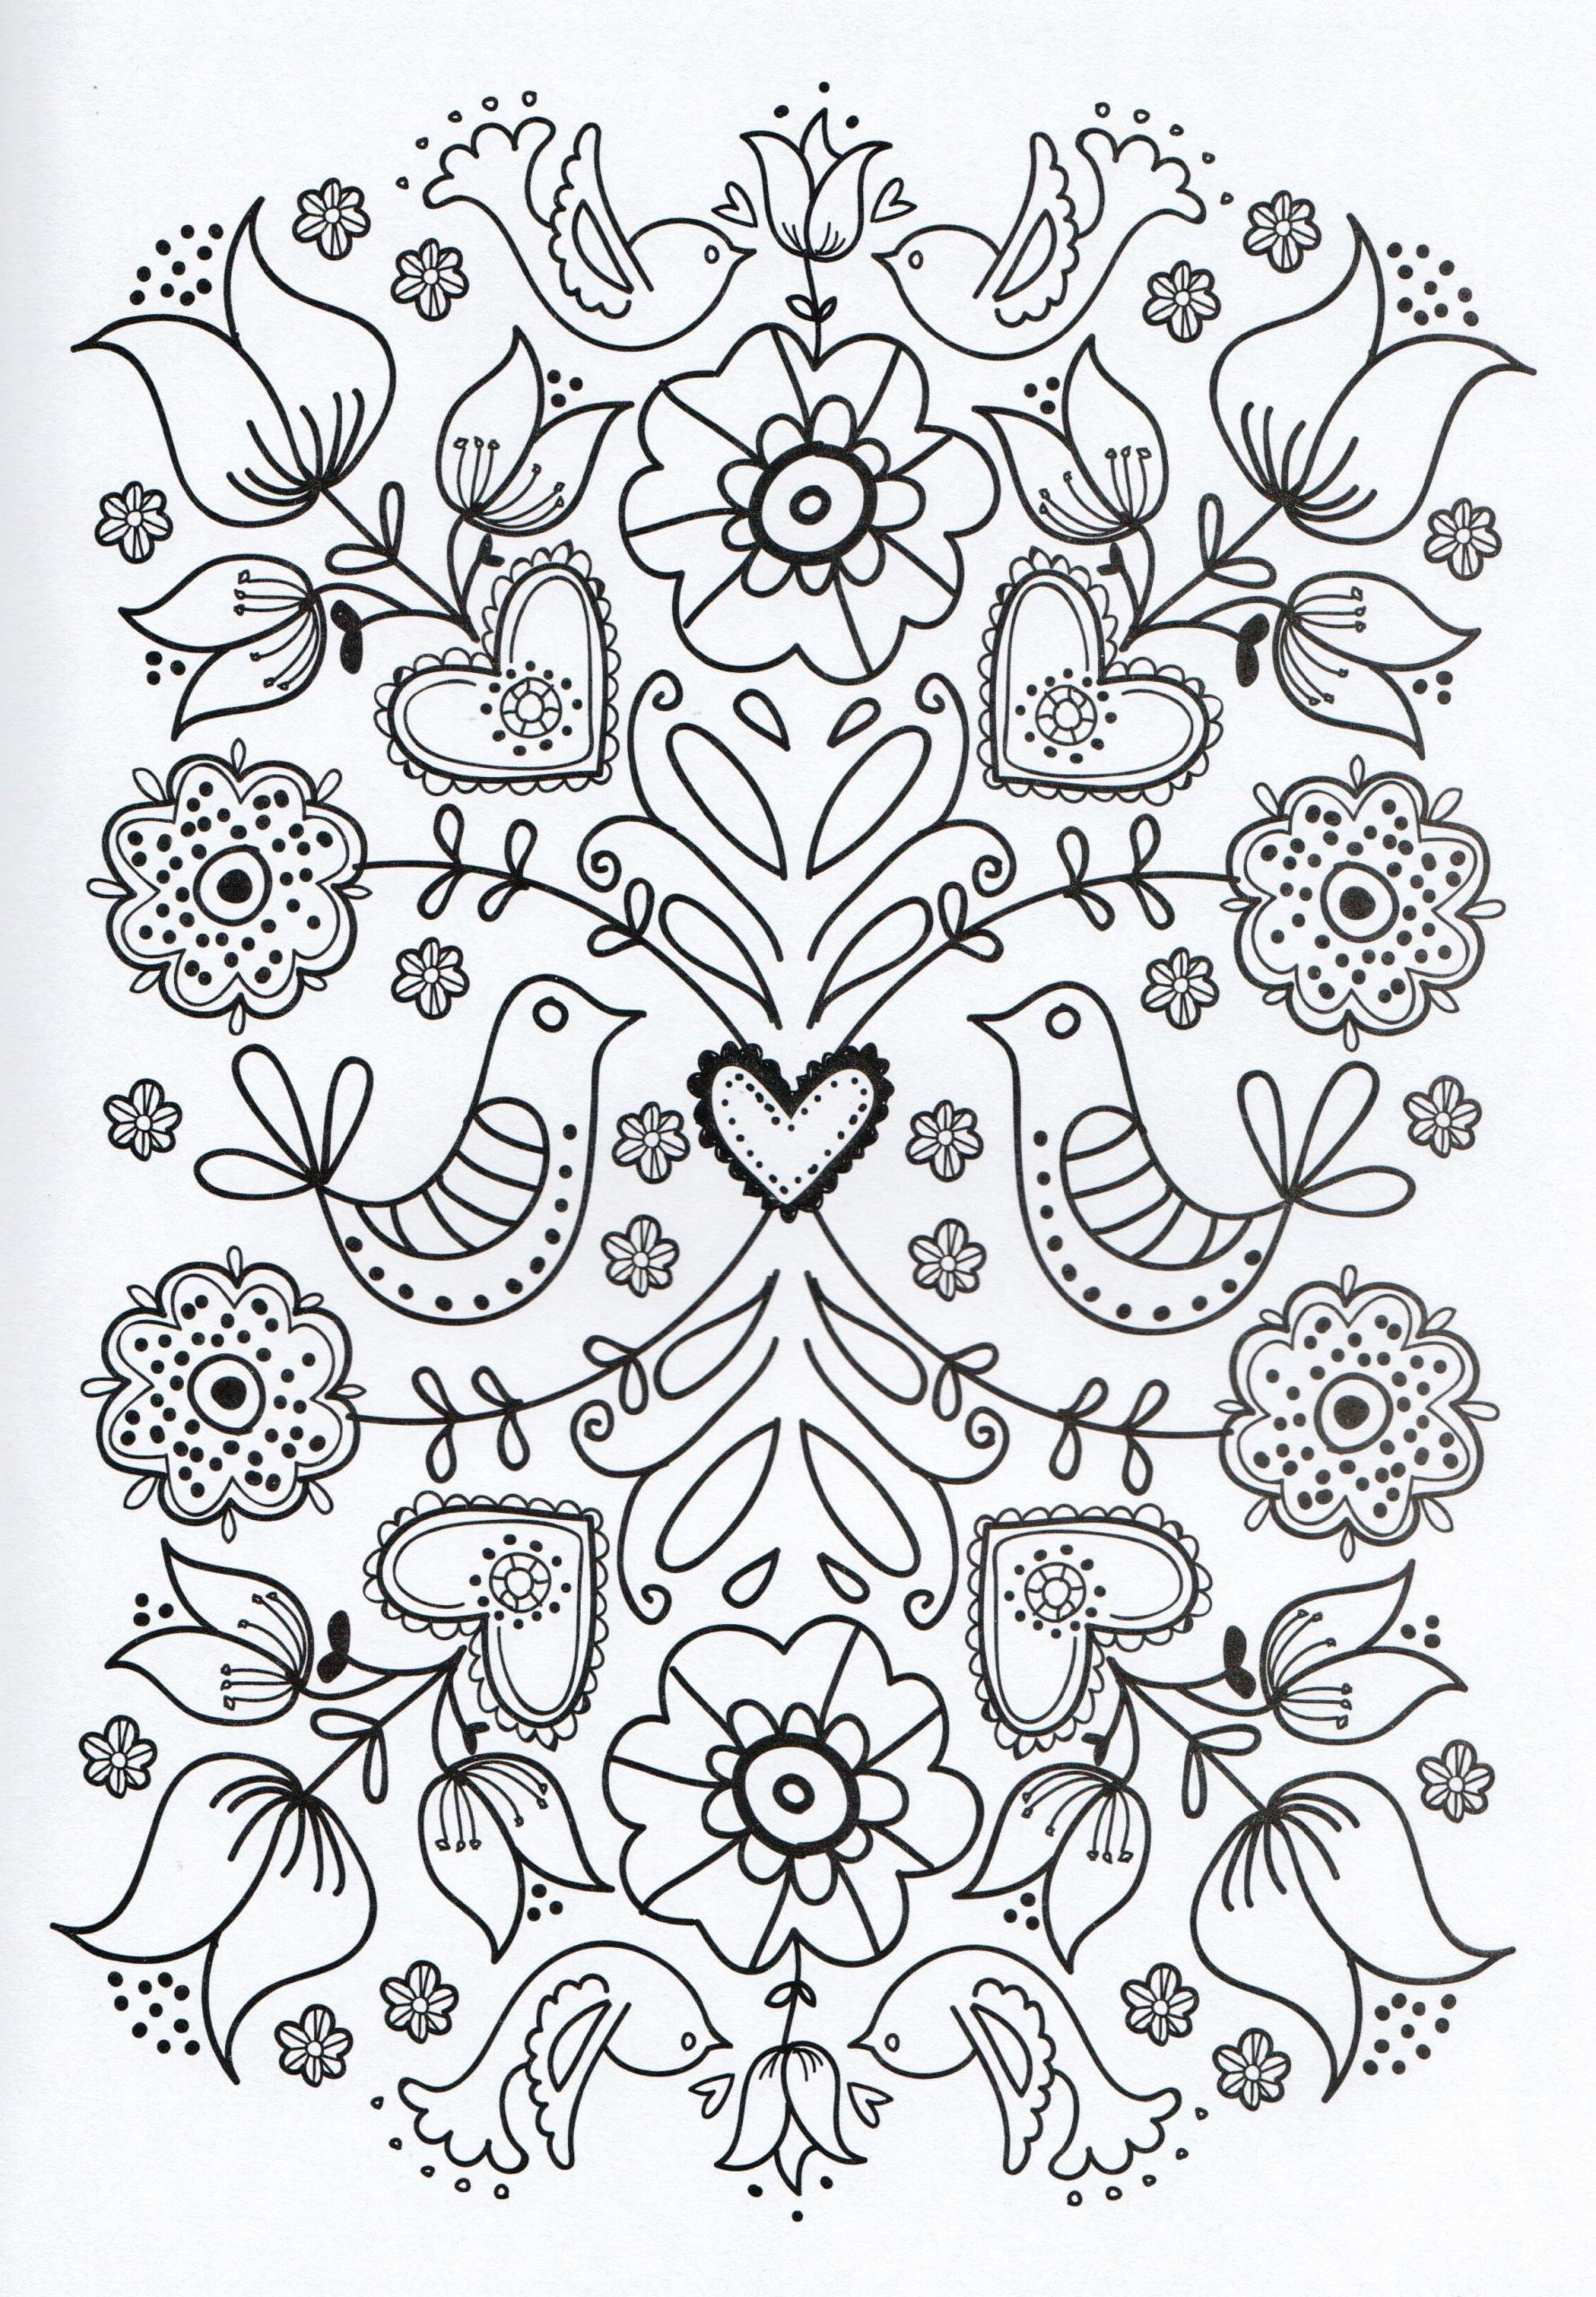 Coloring Pages For Adults Easy
 10 Simple & Useful Mother’s Day Gifts to DIY or Buy